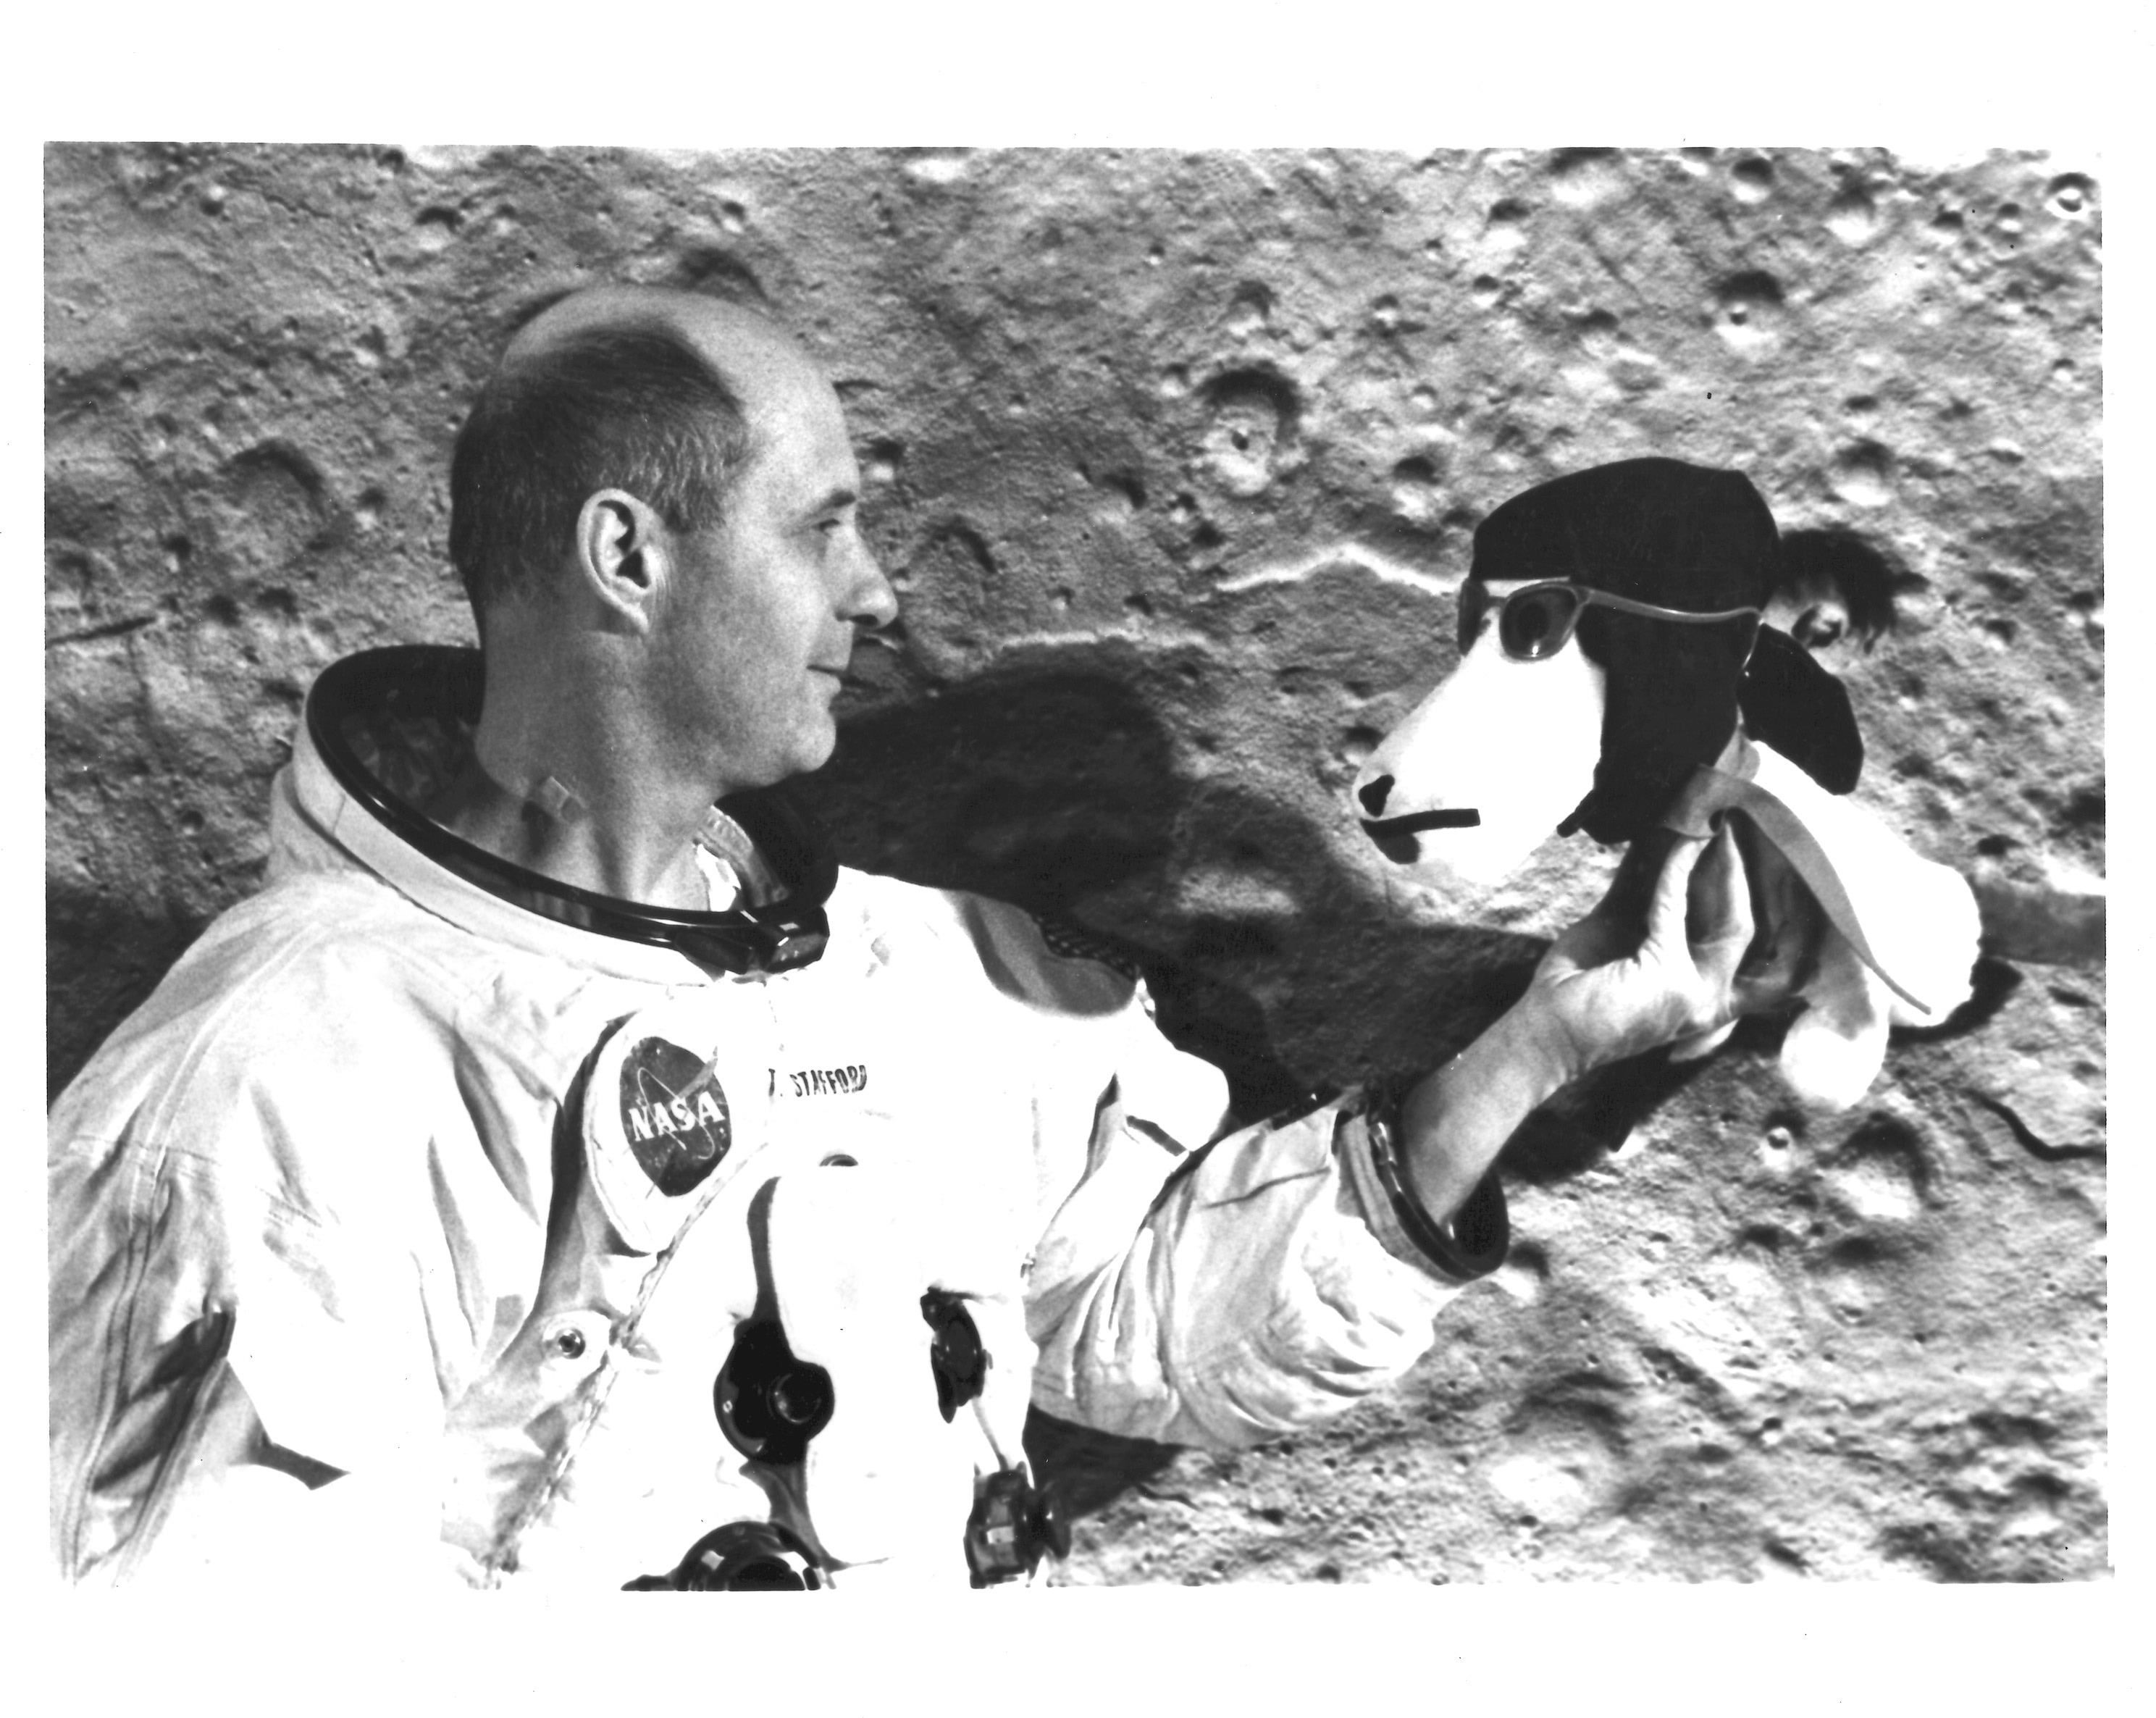 SNOOPY PROUD: Gen. Tom Stafford holds up a stuffed Snoopy, which he chose to nickname the Apollo 10 lunar module.